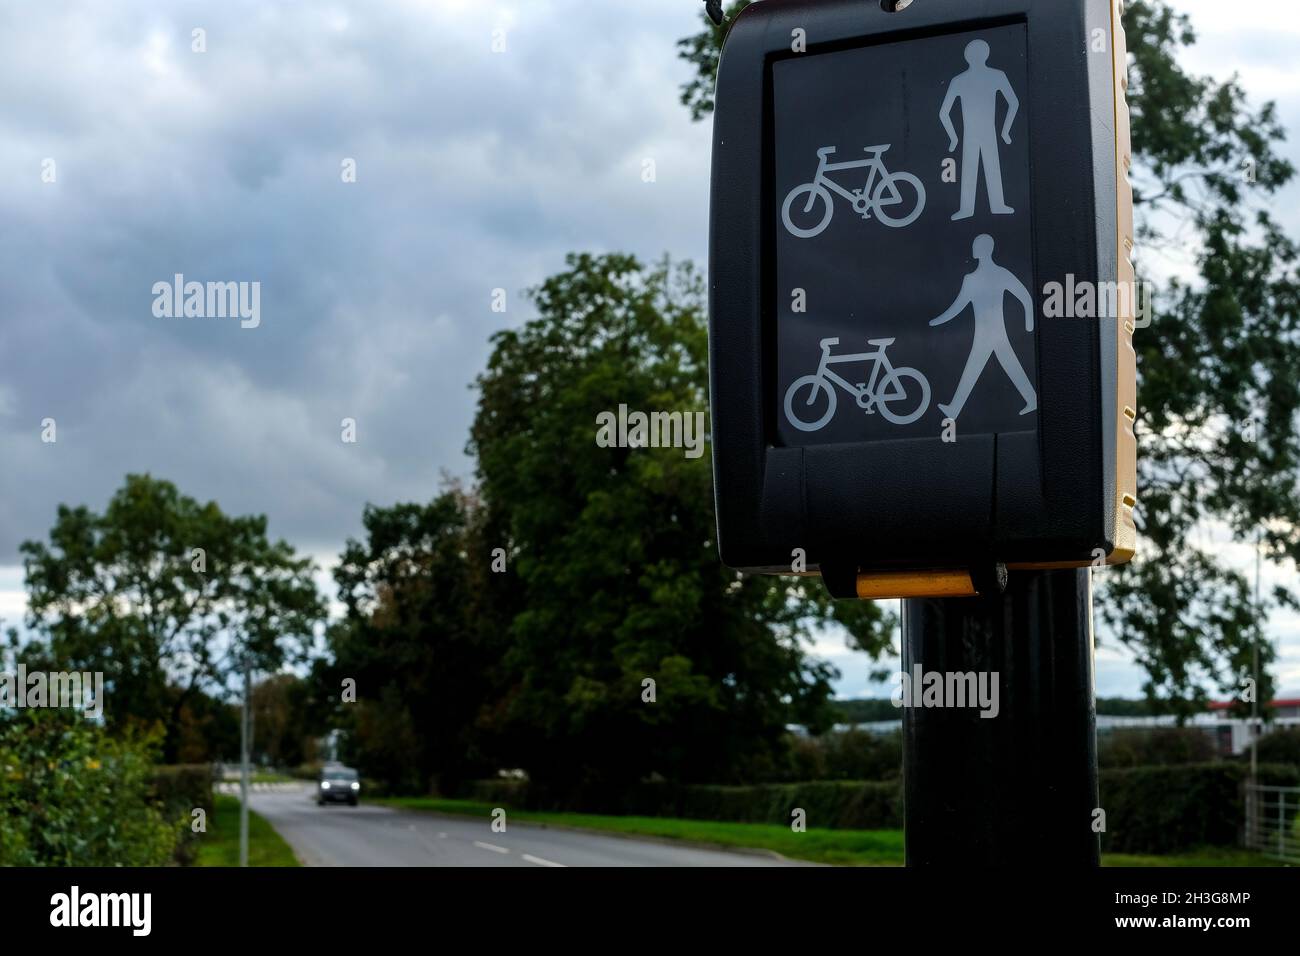 Pedestrian crossing signals outside Silverstone Circuit, Northamptonshire, UK Stock Photo